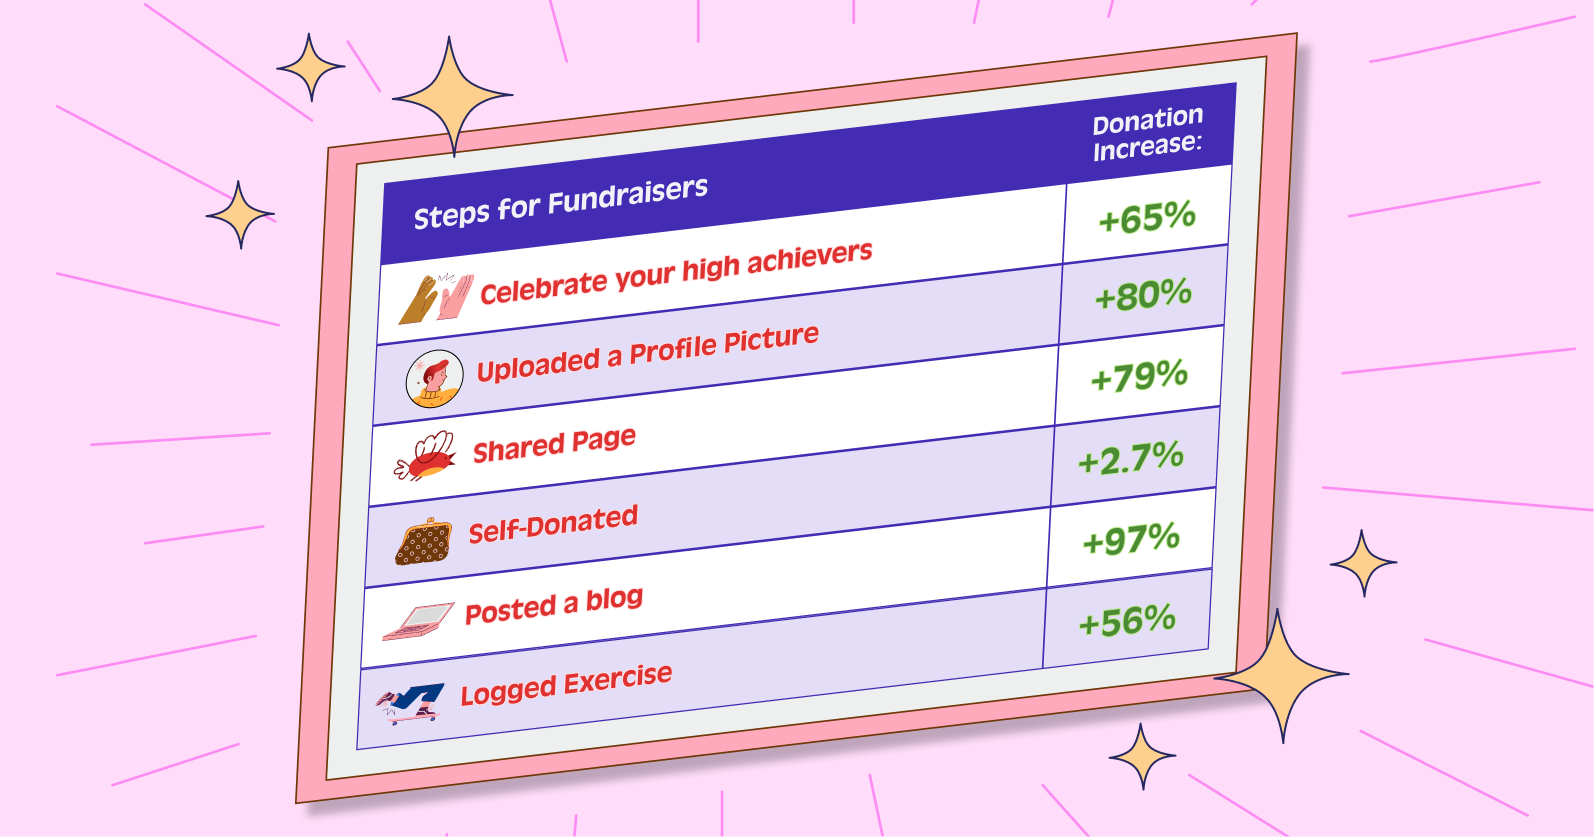 Illustration of a table showing all the 6 essentials and the donation increase potential.